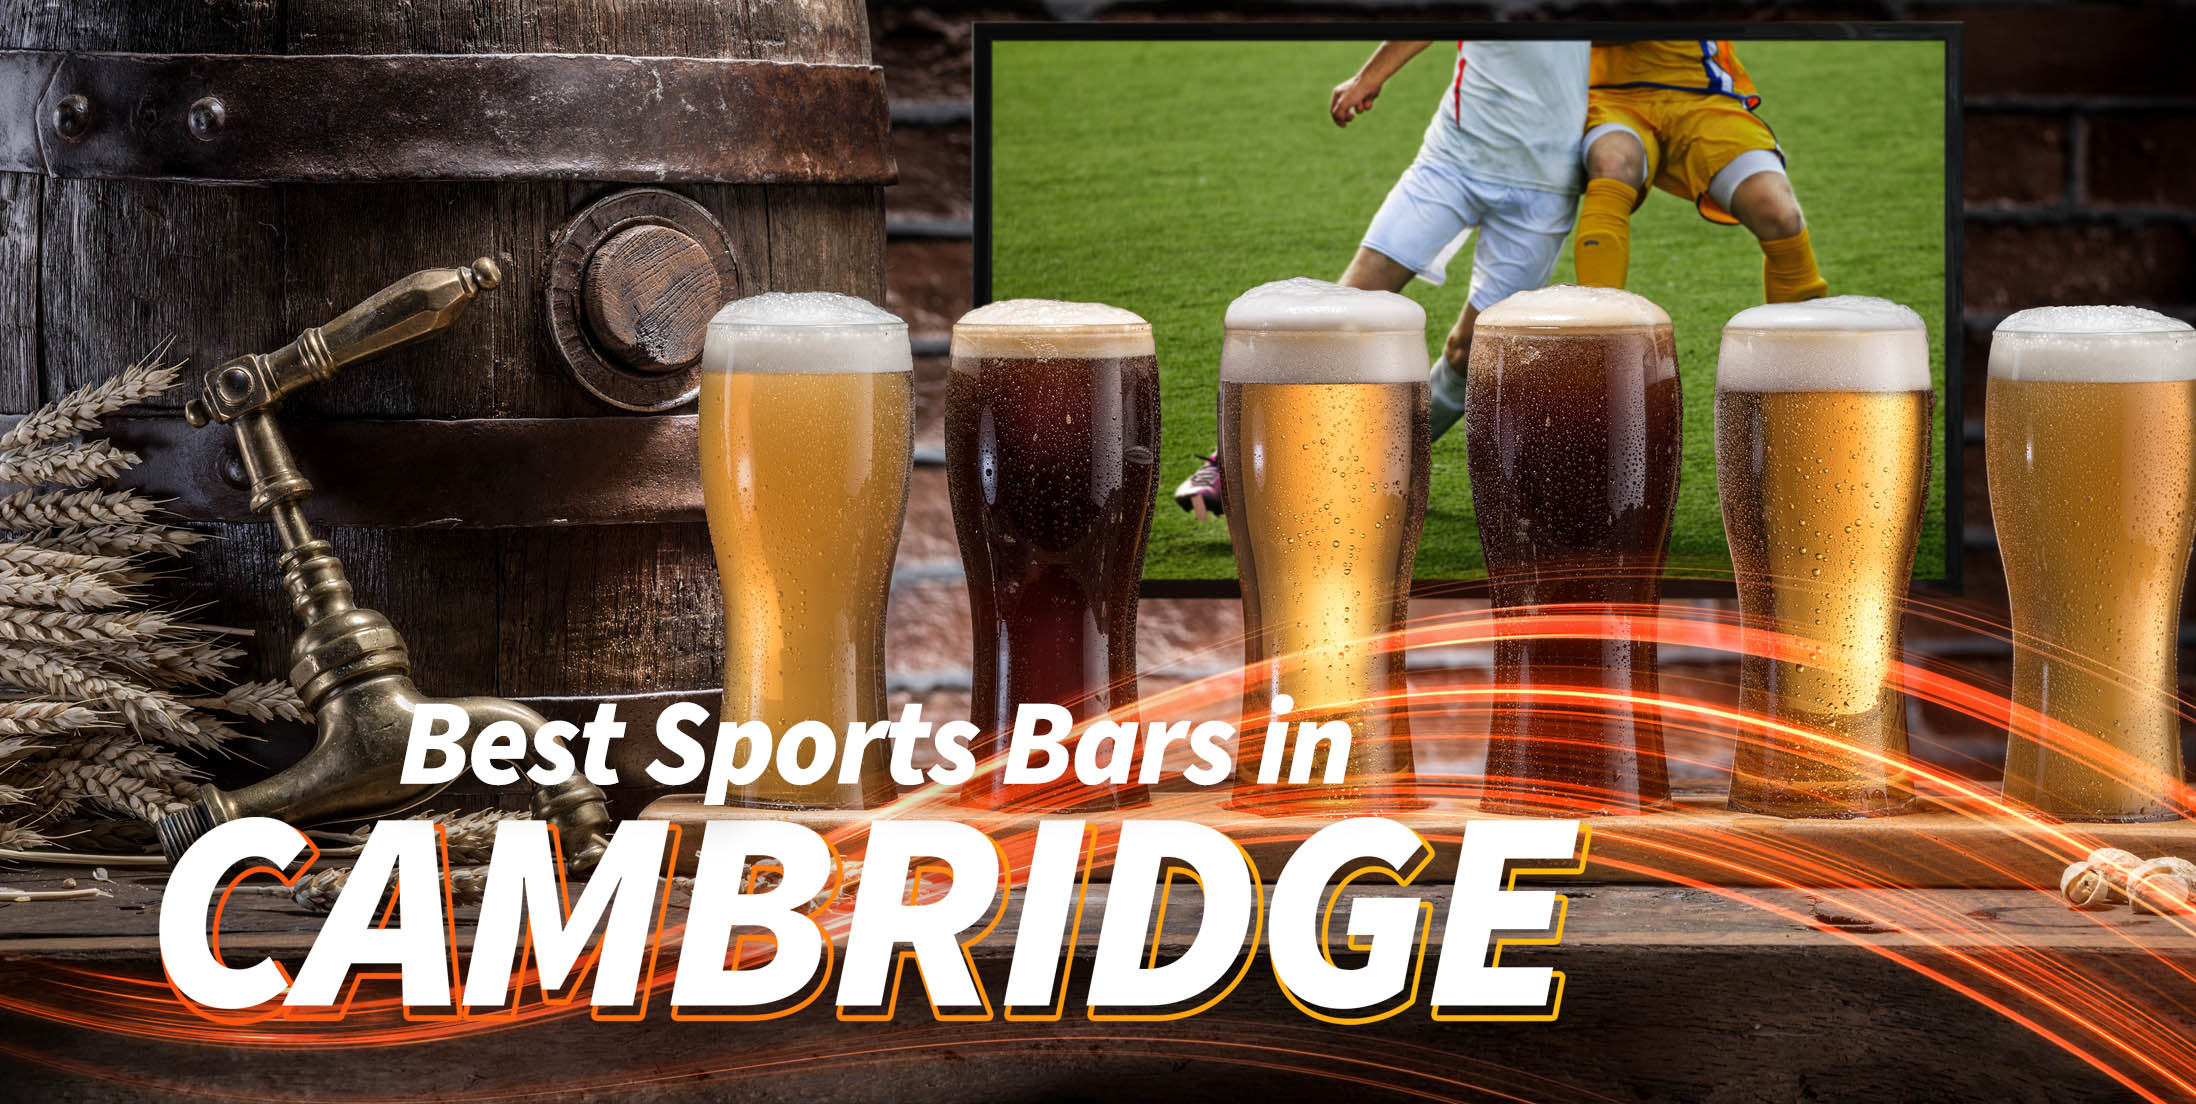 The Best Sports Bars in Cambridge